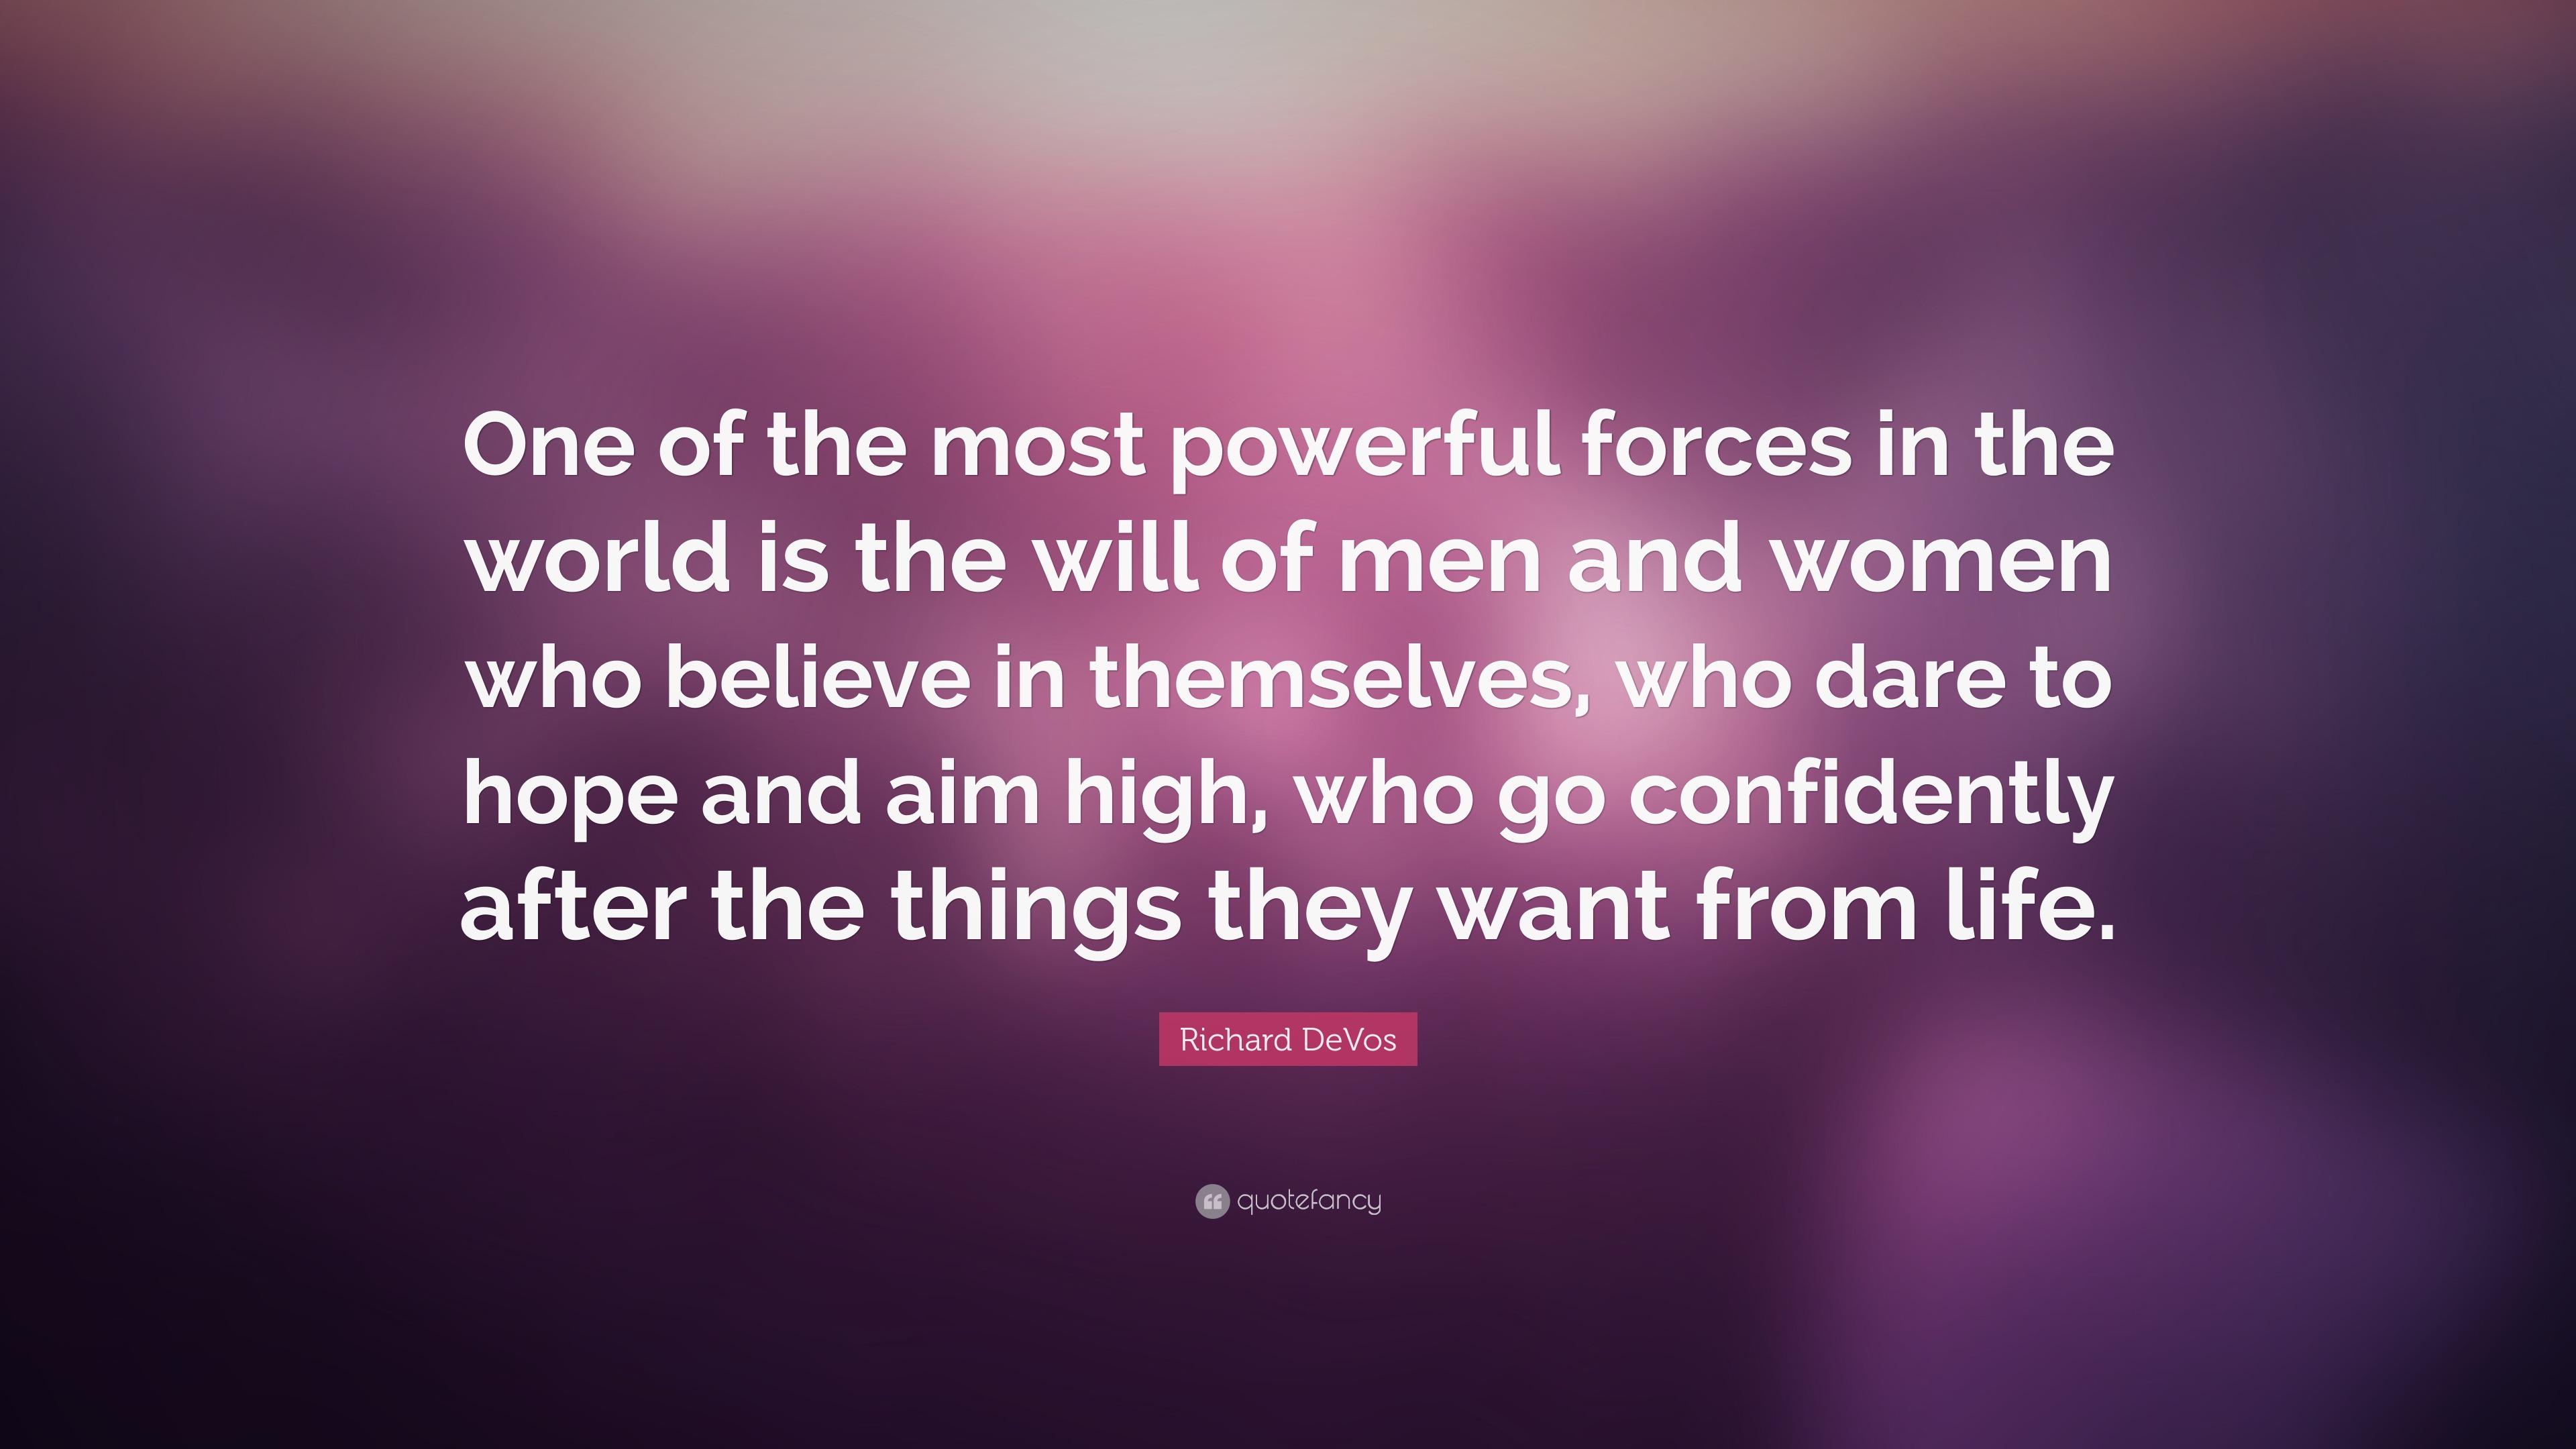 Richard DeVos Quote: “One of the most powerful forces in the world is ...